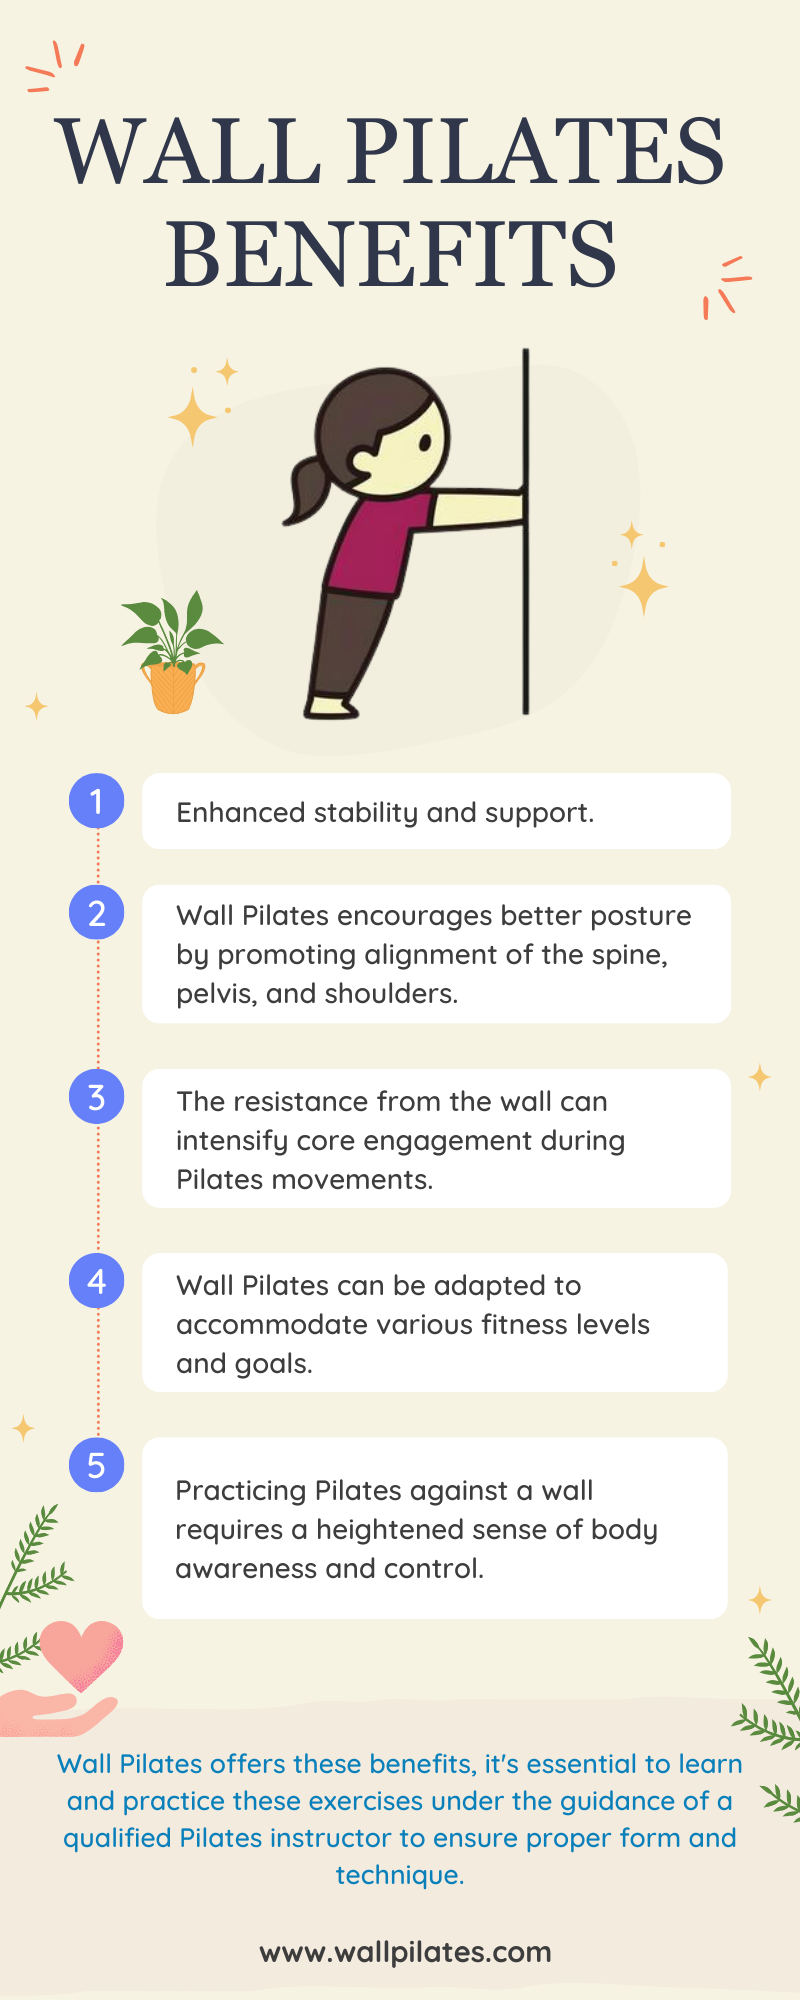 Pilates stretching - is Pilates good for stretching? The benefits